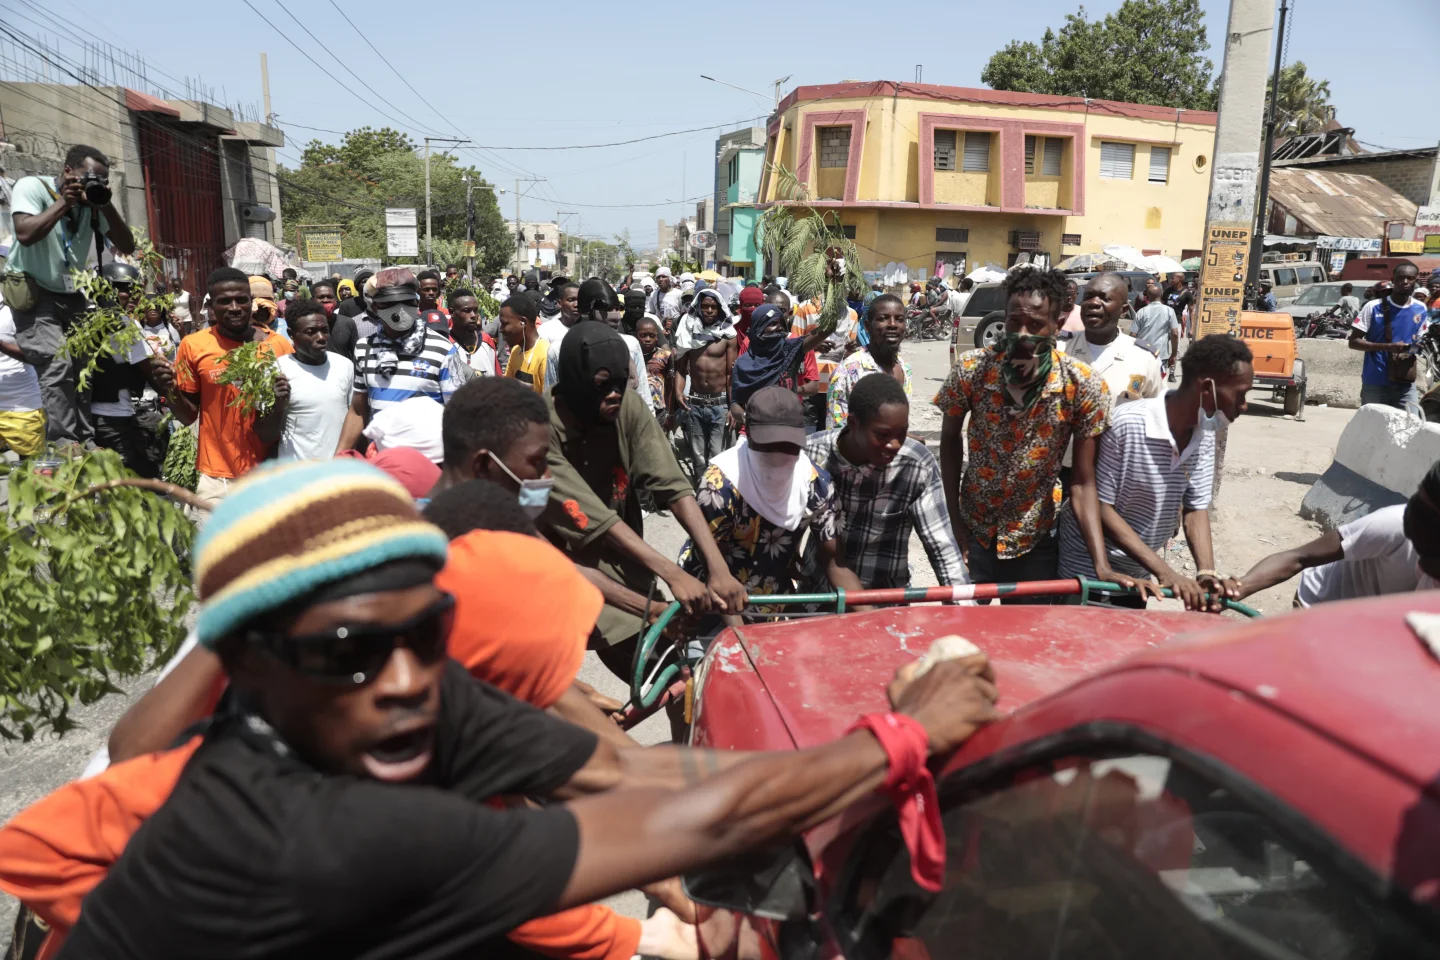 Thousands in Haiti March to Demand Safety from Violent Gangs as Killings and Kidnappings Soar